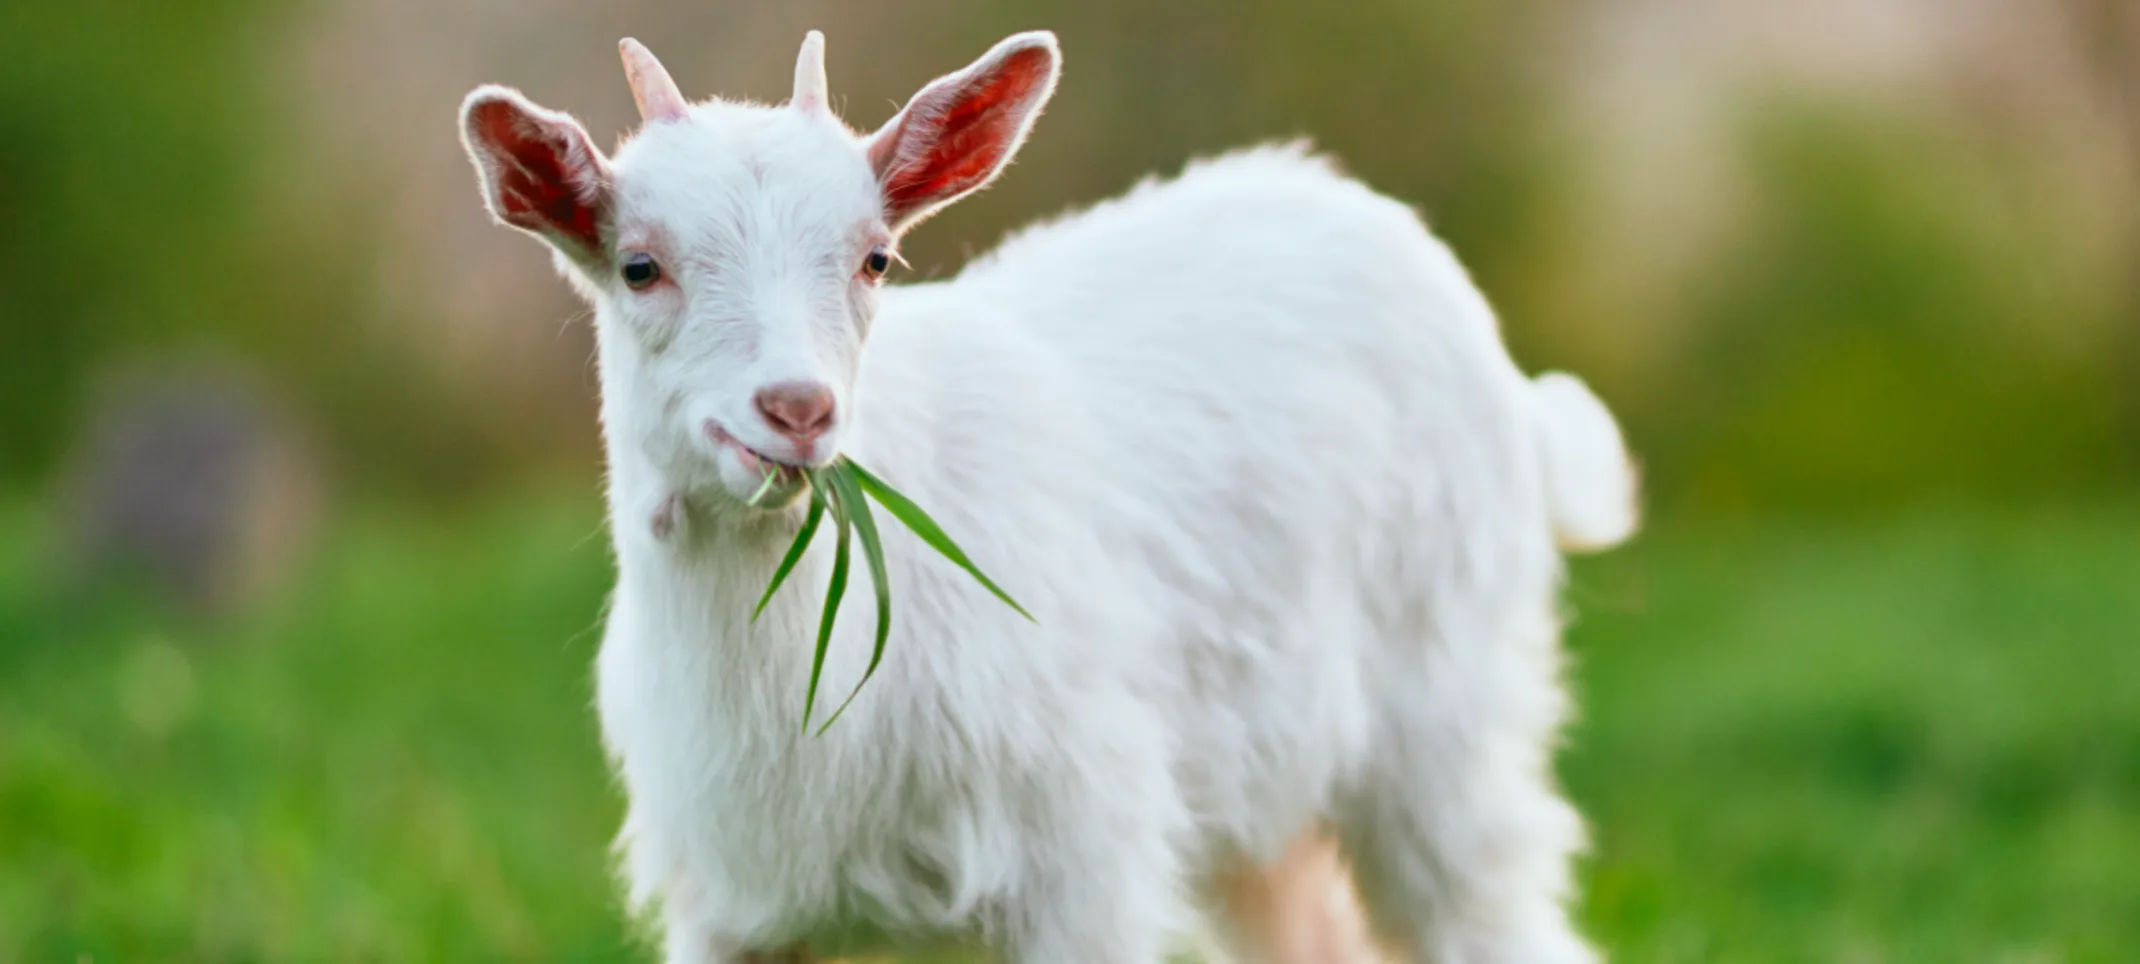 Goat eating grass while sitting in grass